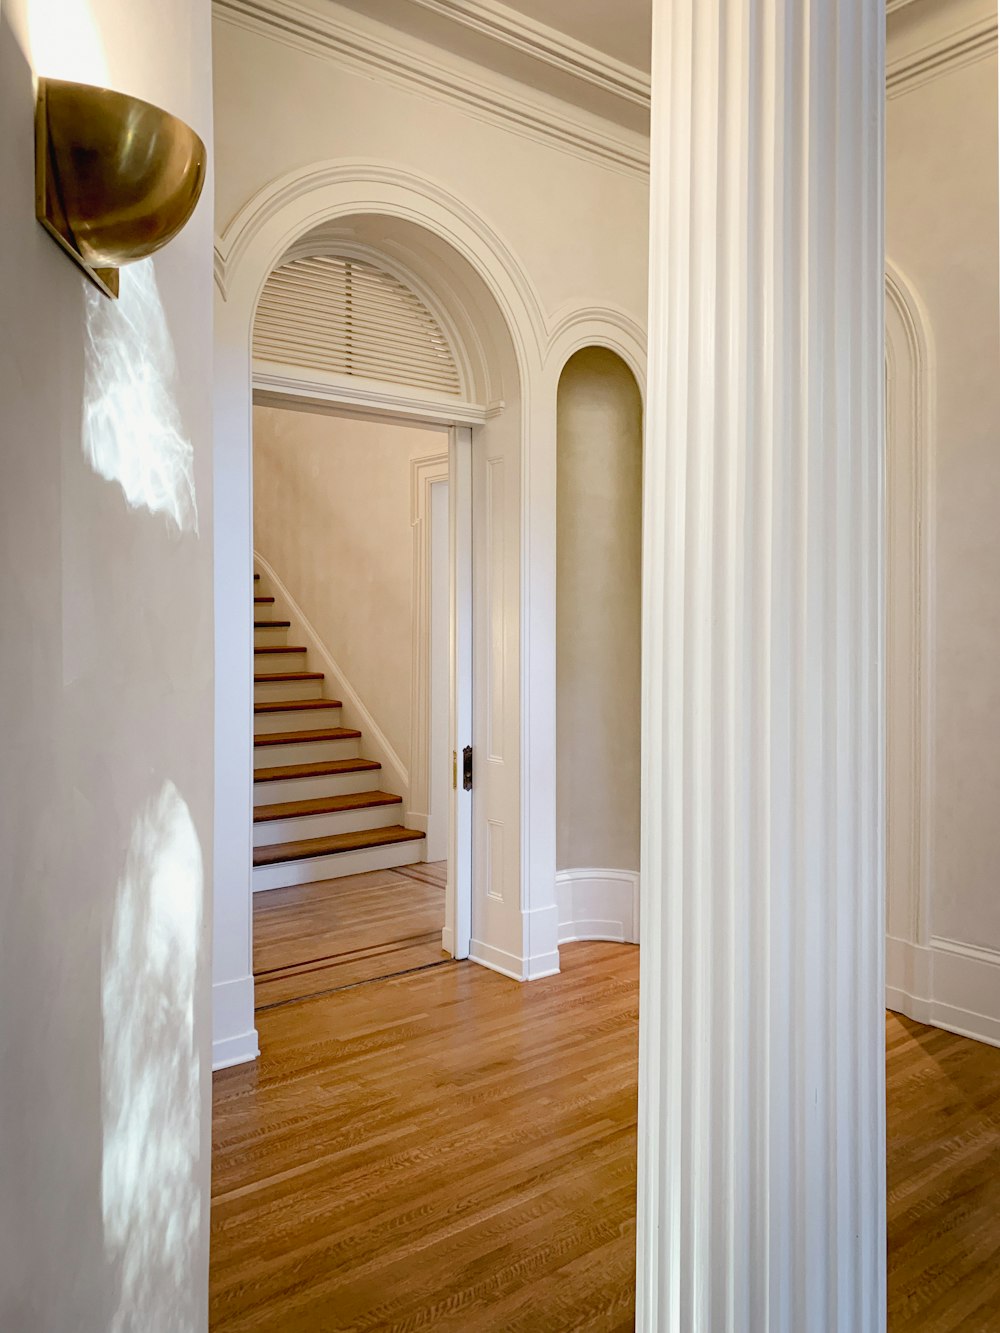 a room with a wooden floor and white columns